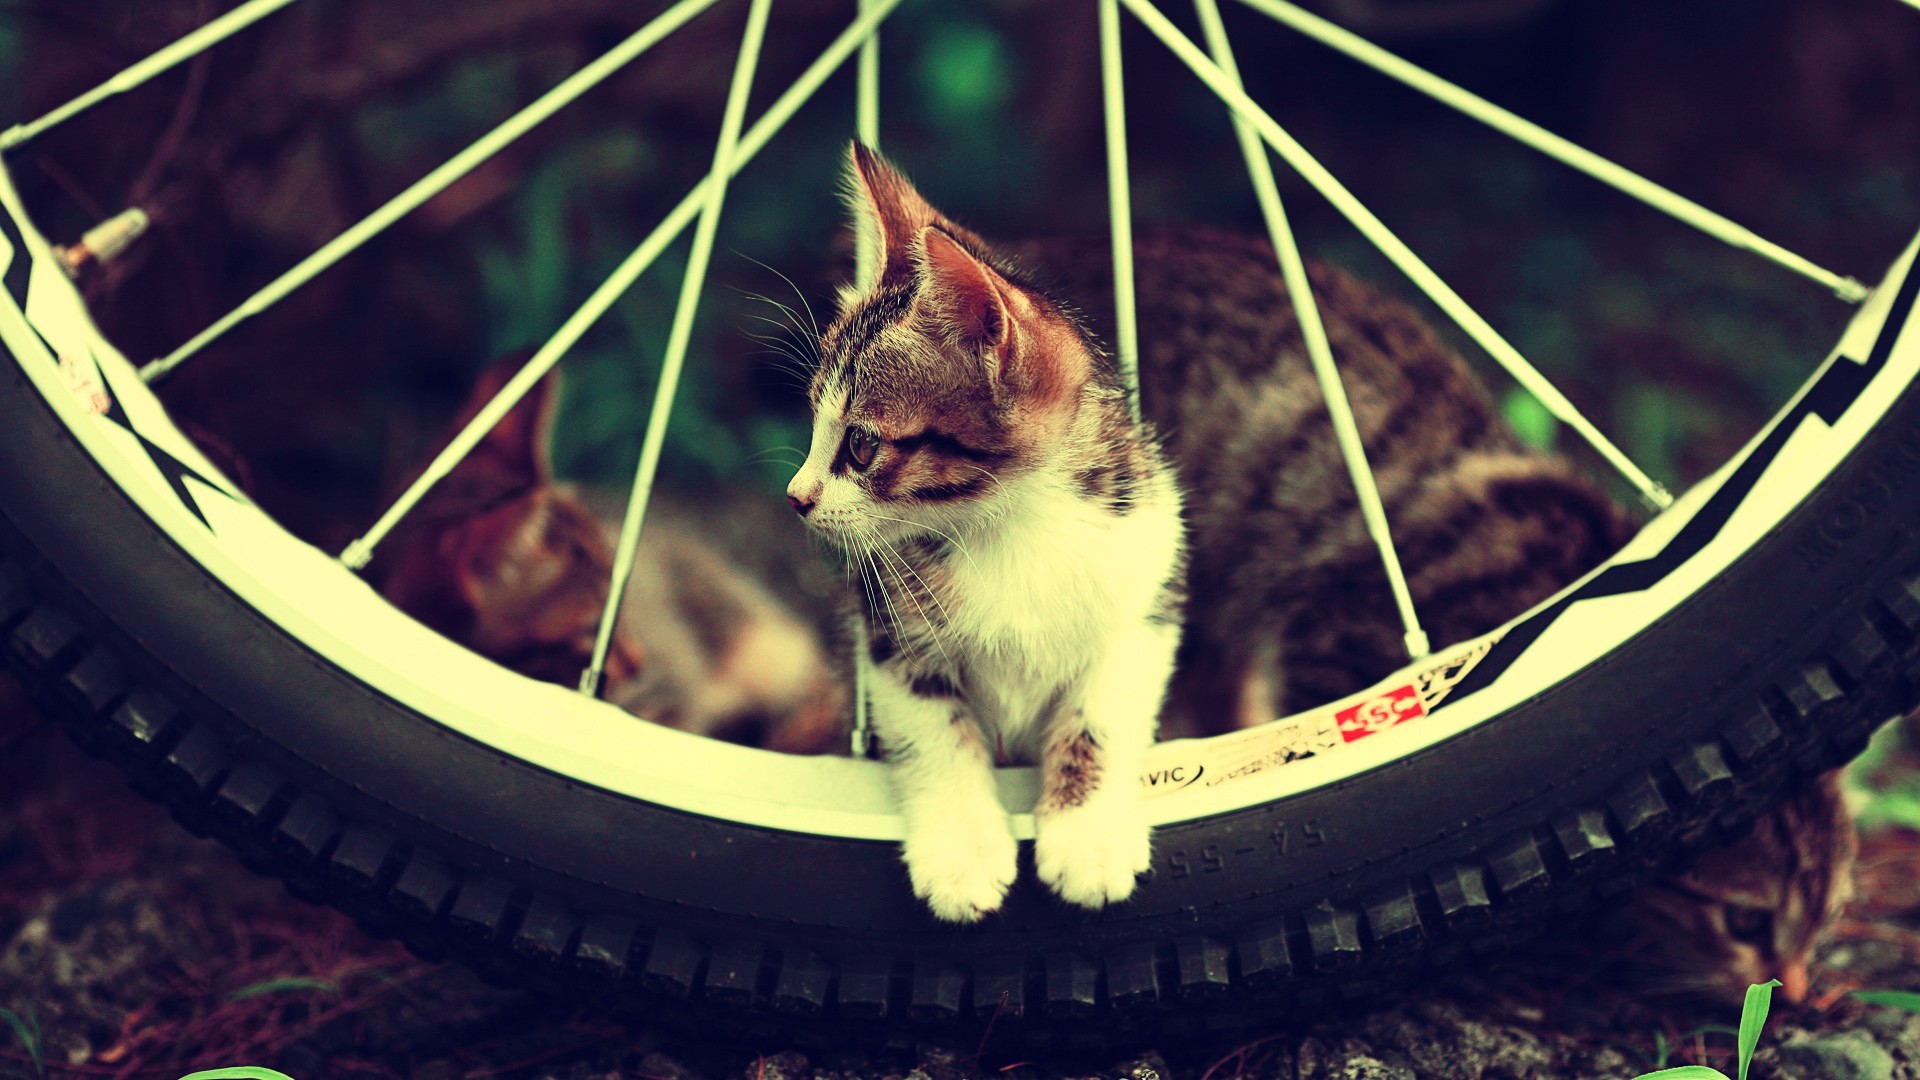 General 1920x1080 cats animals bicycle kittens mammals outdoors